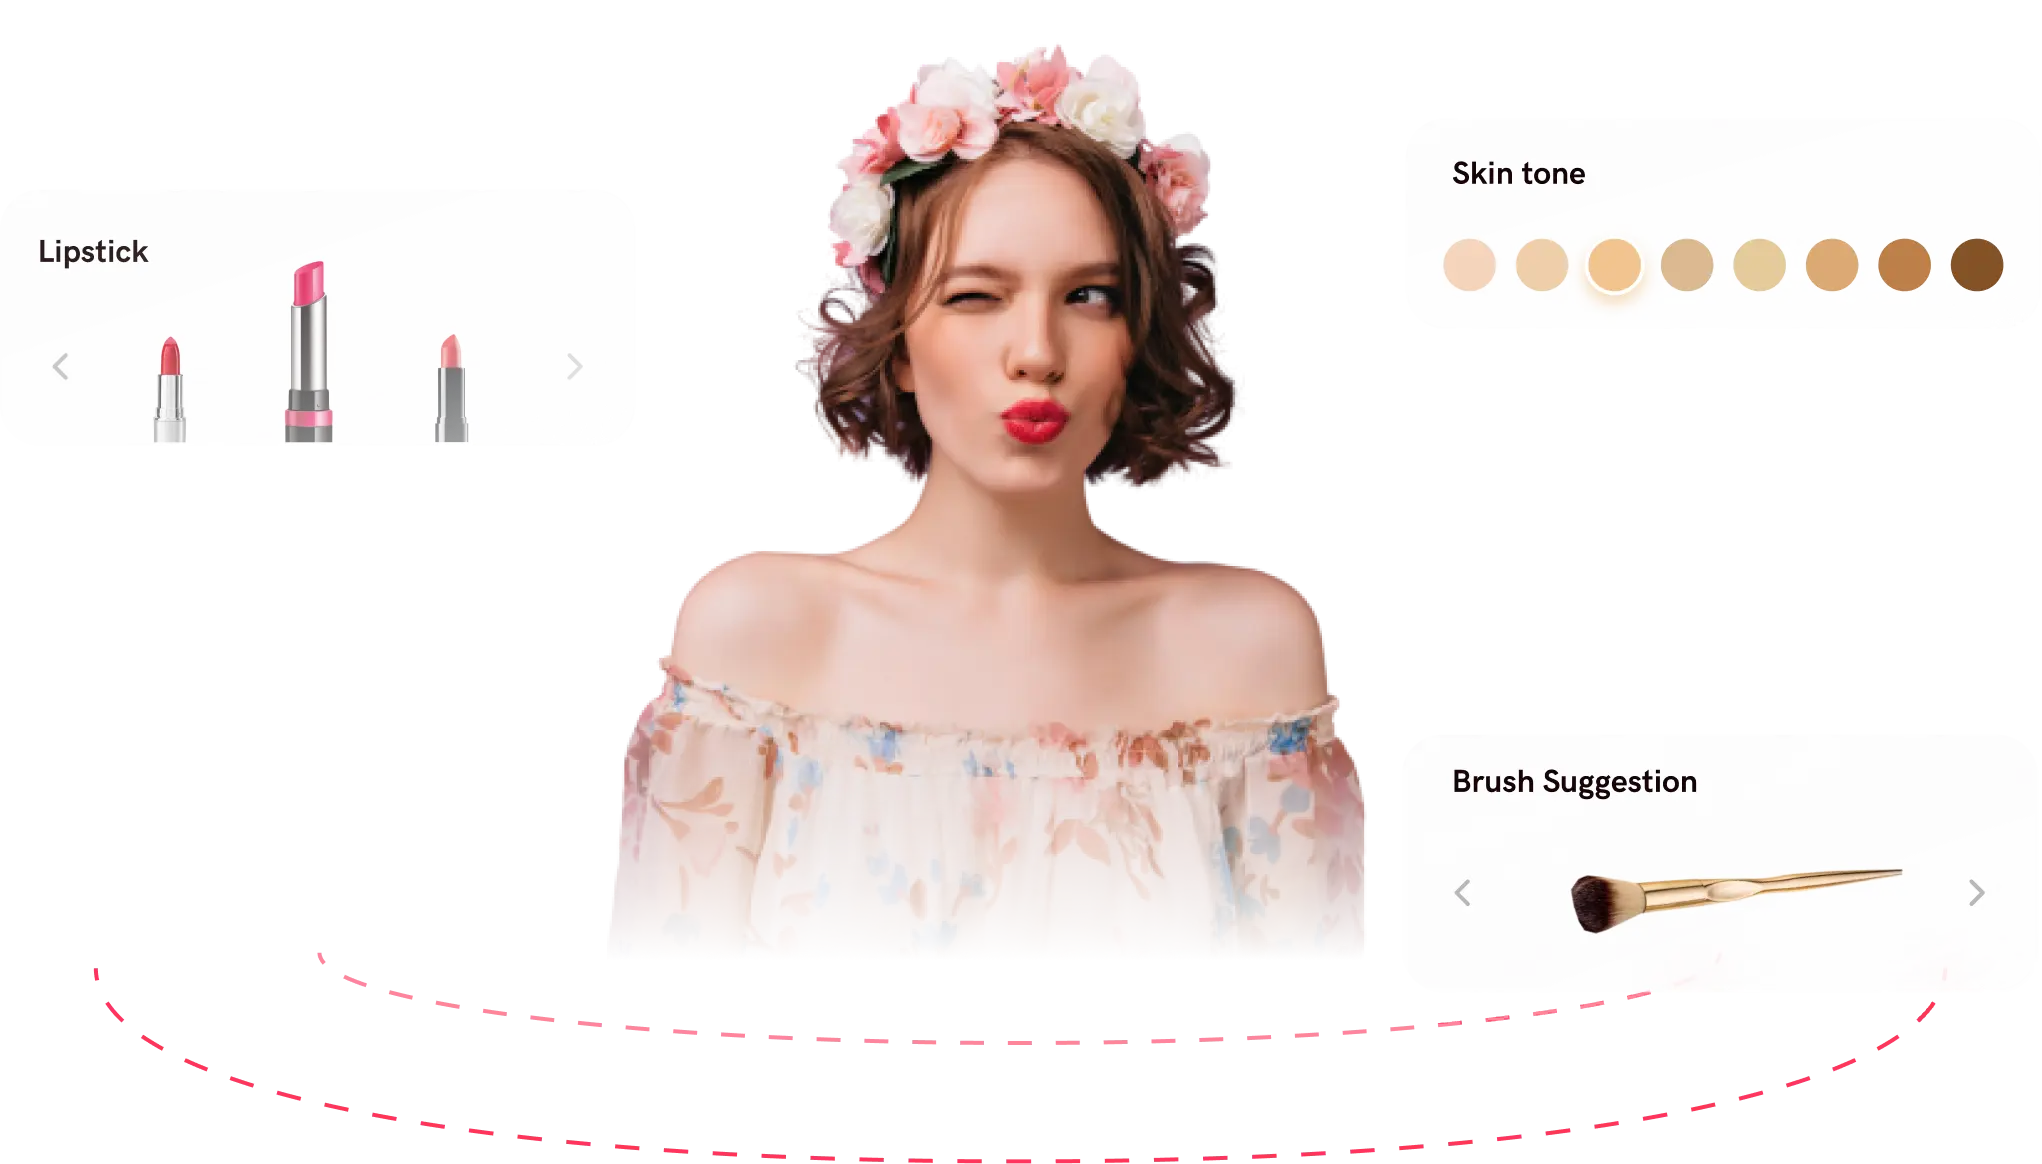 A girl is being recommended products using virtual makeup try-on and AI skin analysis